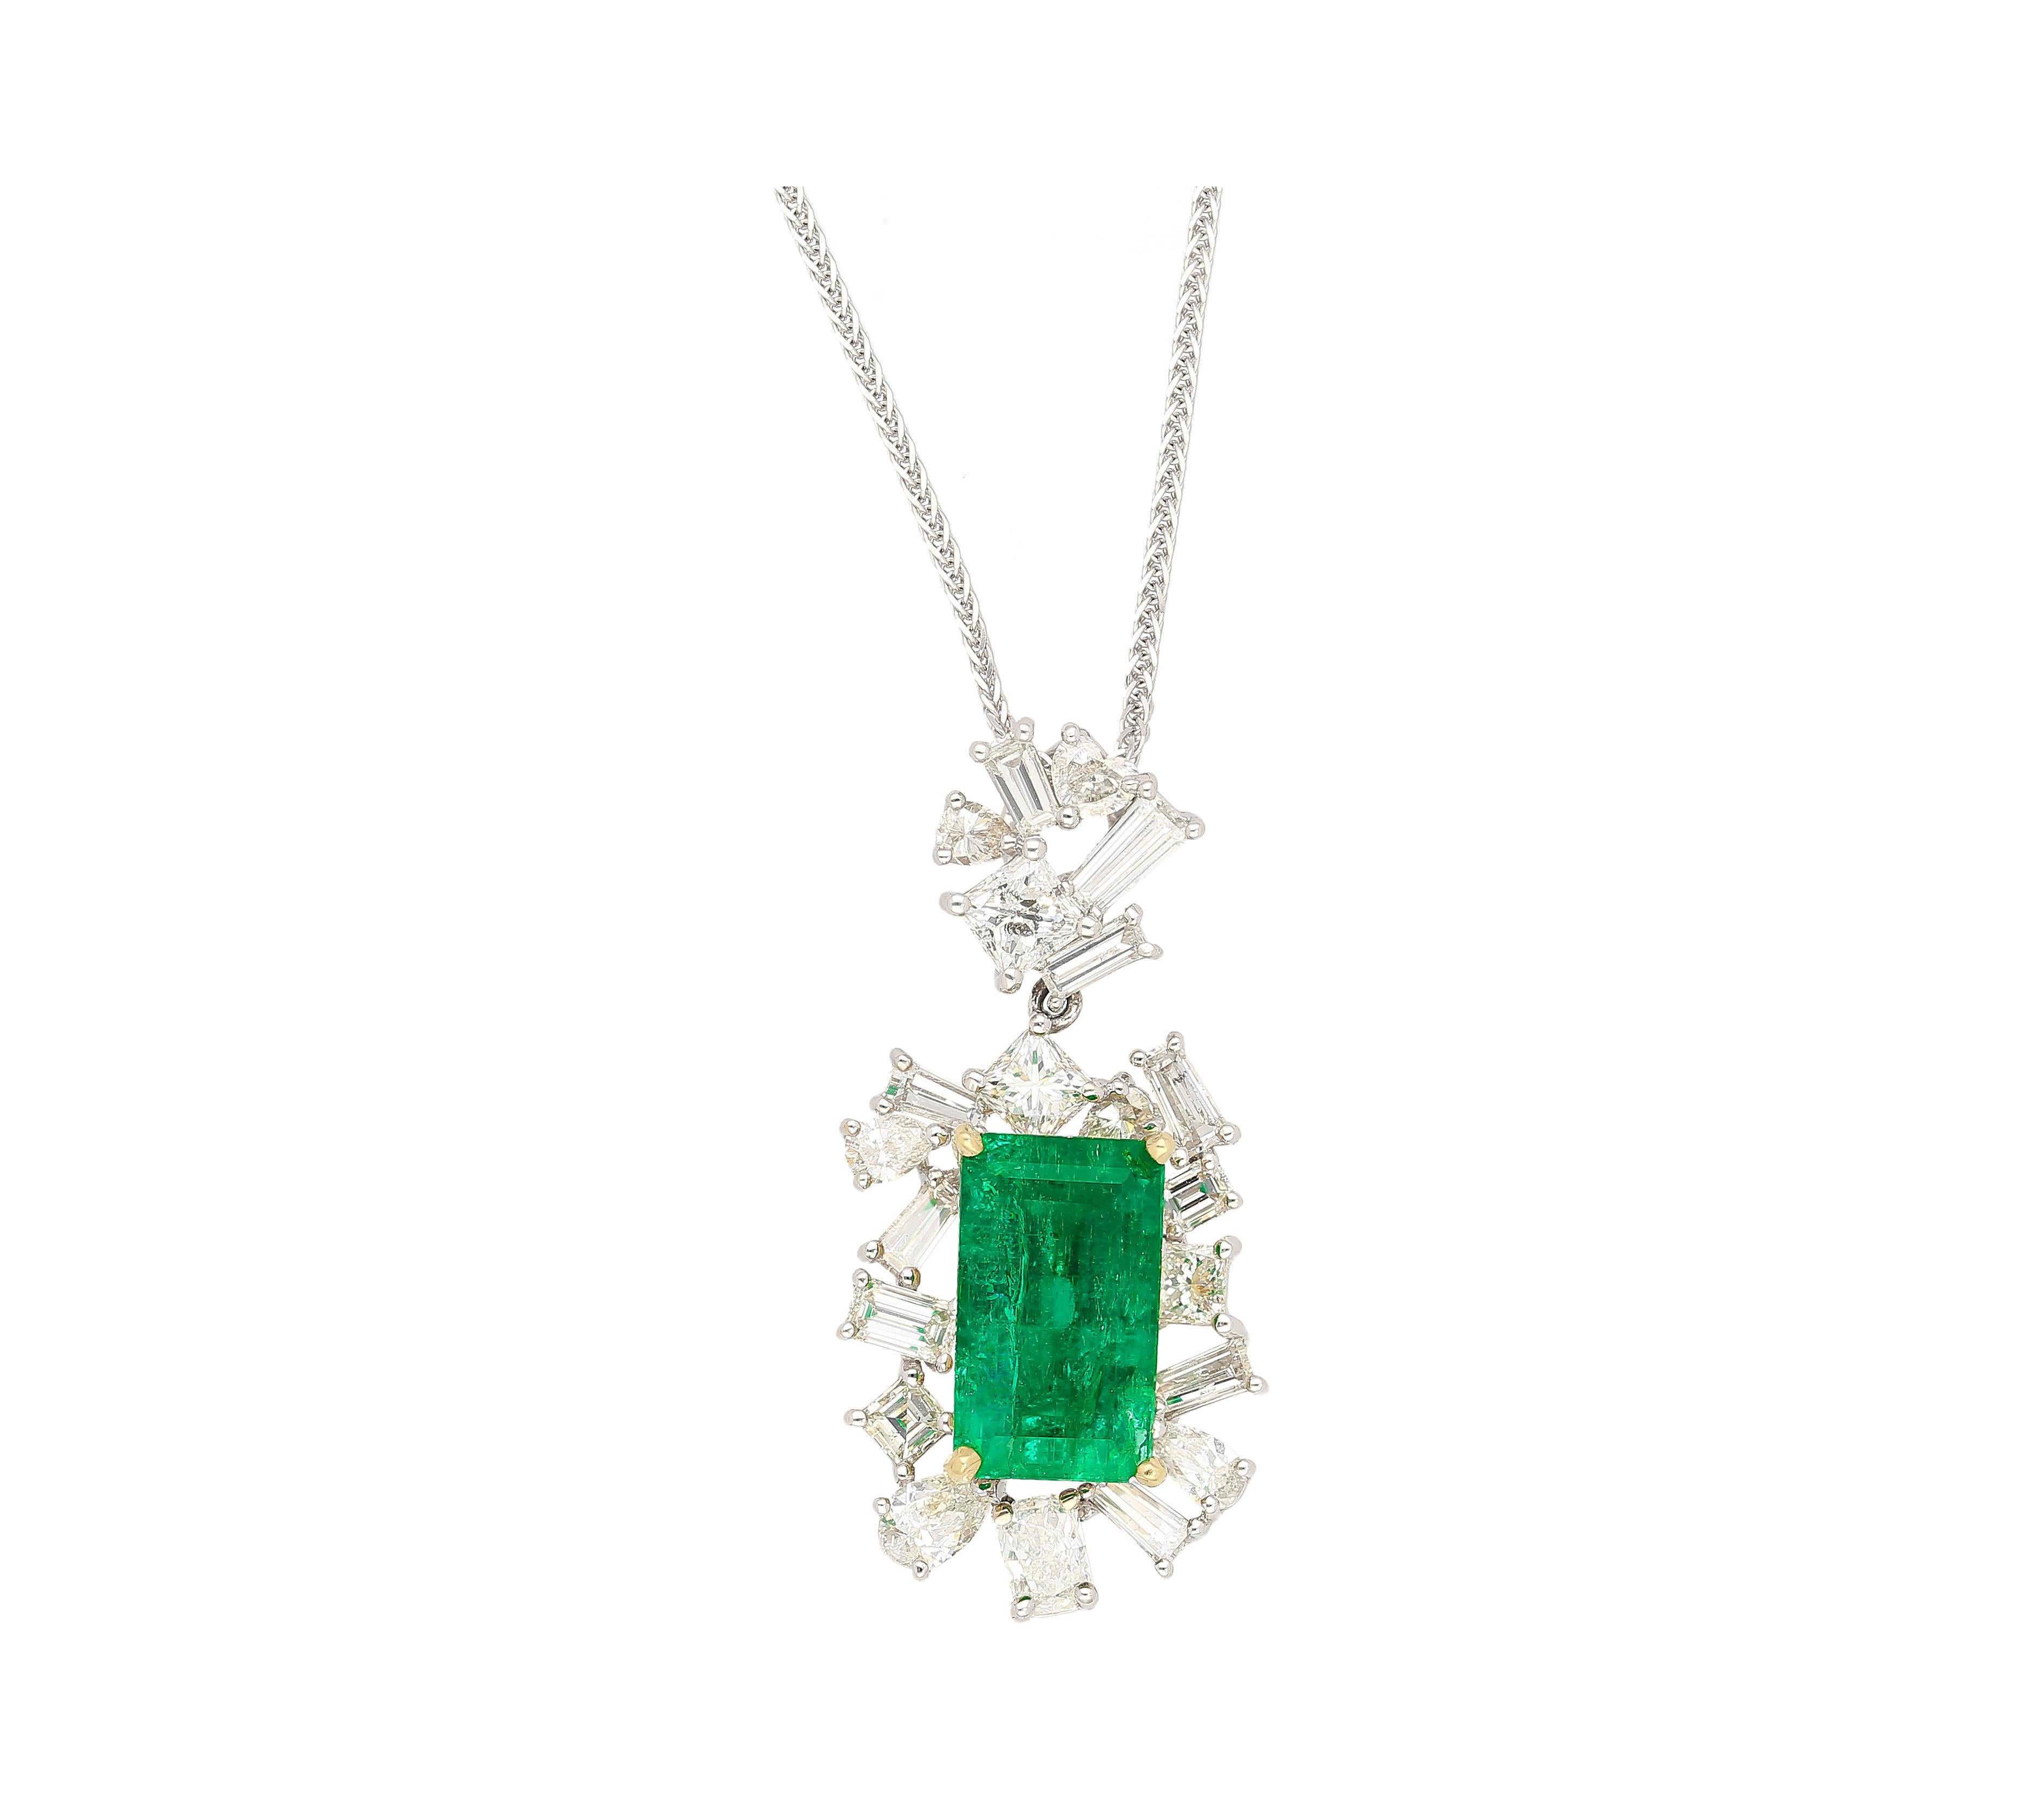 GIA & GRS Certified 2.76 Carat Muzo Mine Minor Oil Colombian Emerald and Diamond Cluster Pendant Necklace. Adorned with a dazzling display of pear, heart, baguette, radiant, emerald and princess cut diamonds. A stunning ensemble of all the major